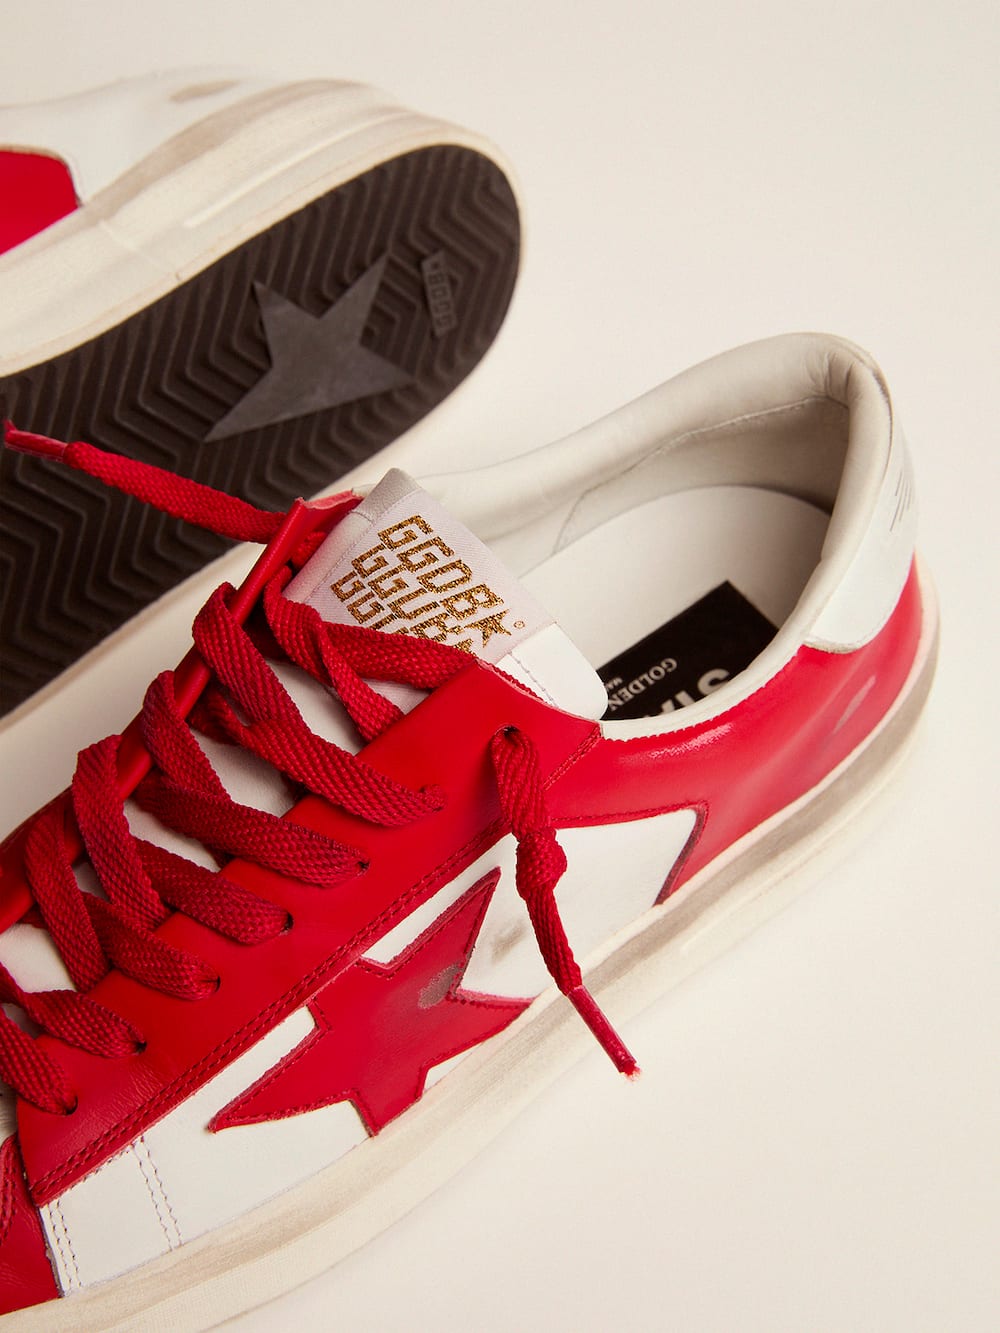 Golden Goose - Men's Stardan in white and red leather in 